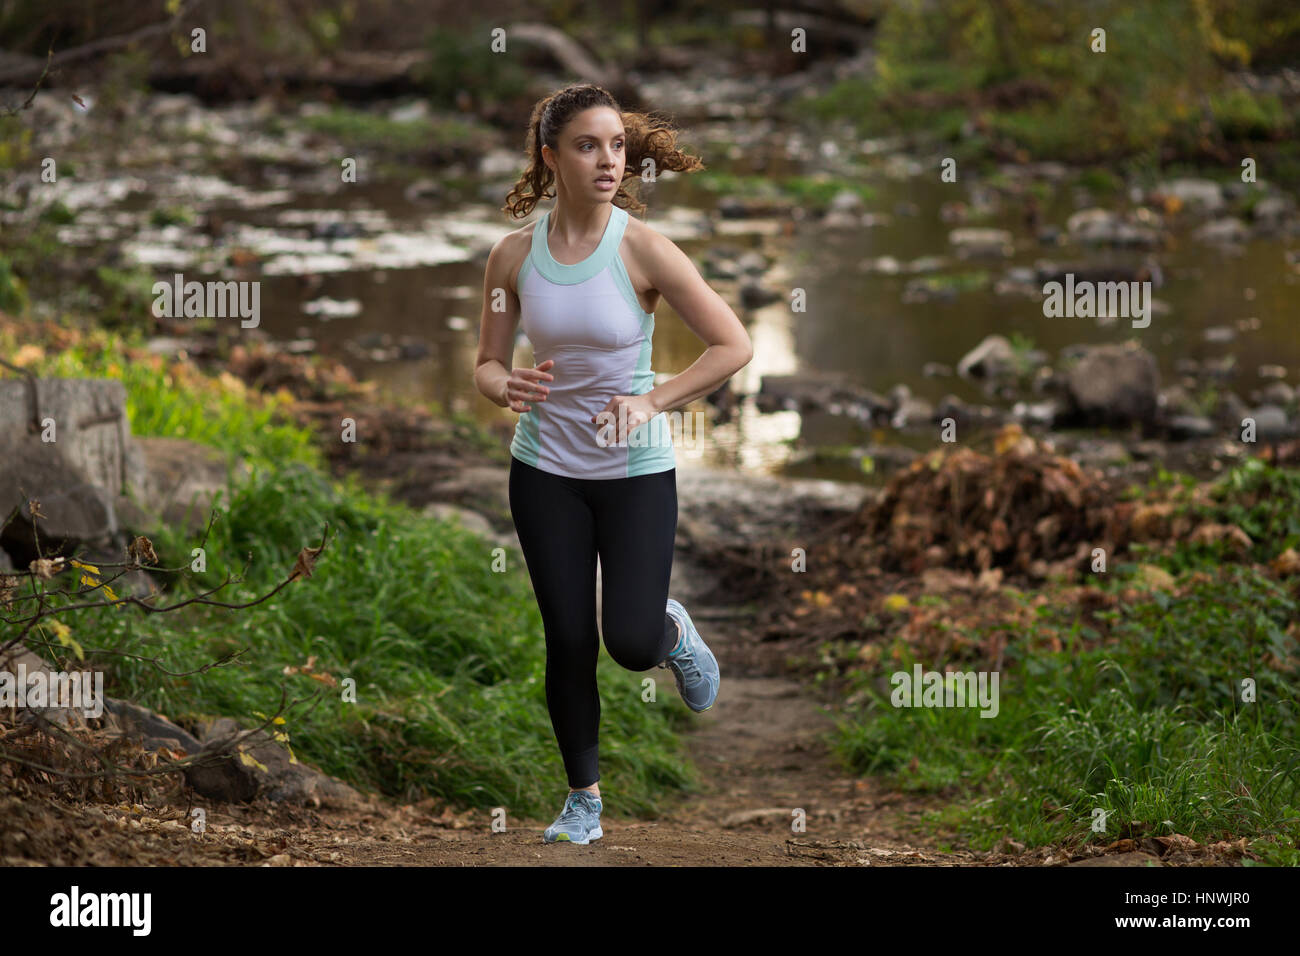 Young woman exercising, running, near river Stock Photo